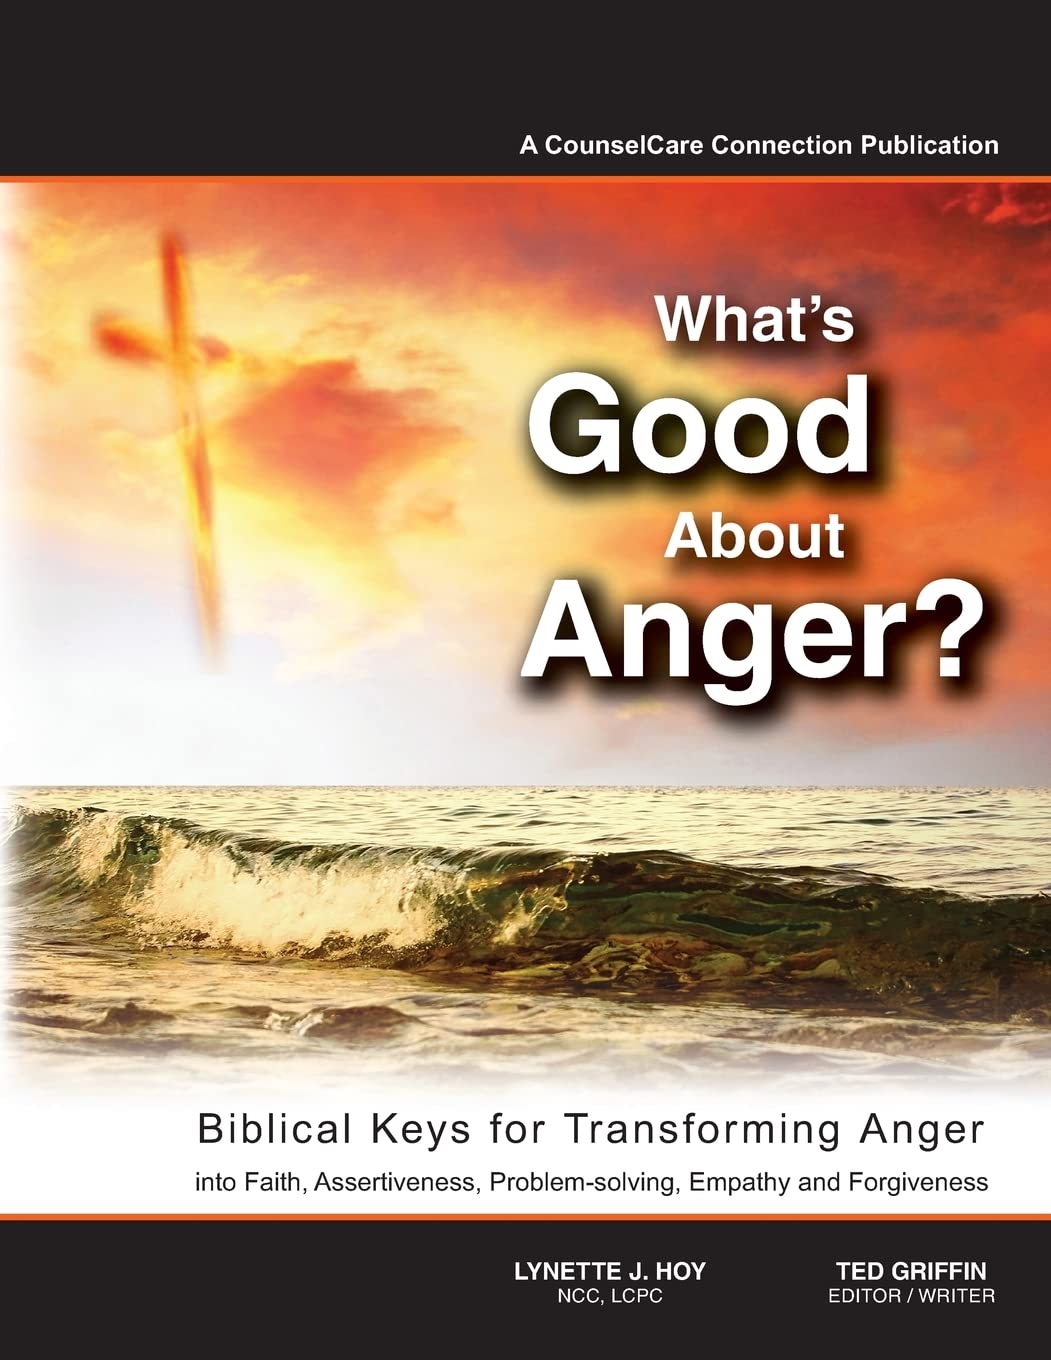 What's Good About Anger? Biblical Keys for Transforming Anger: Into Faith, Assertiveness, Problem-Solving, Empathy &amp; Forgiveness - SureShot Books Publishing LLC